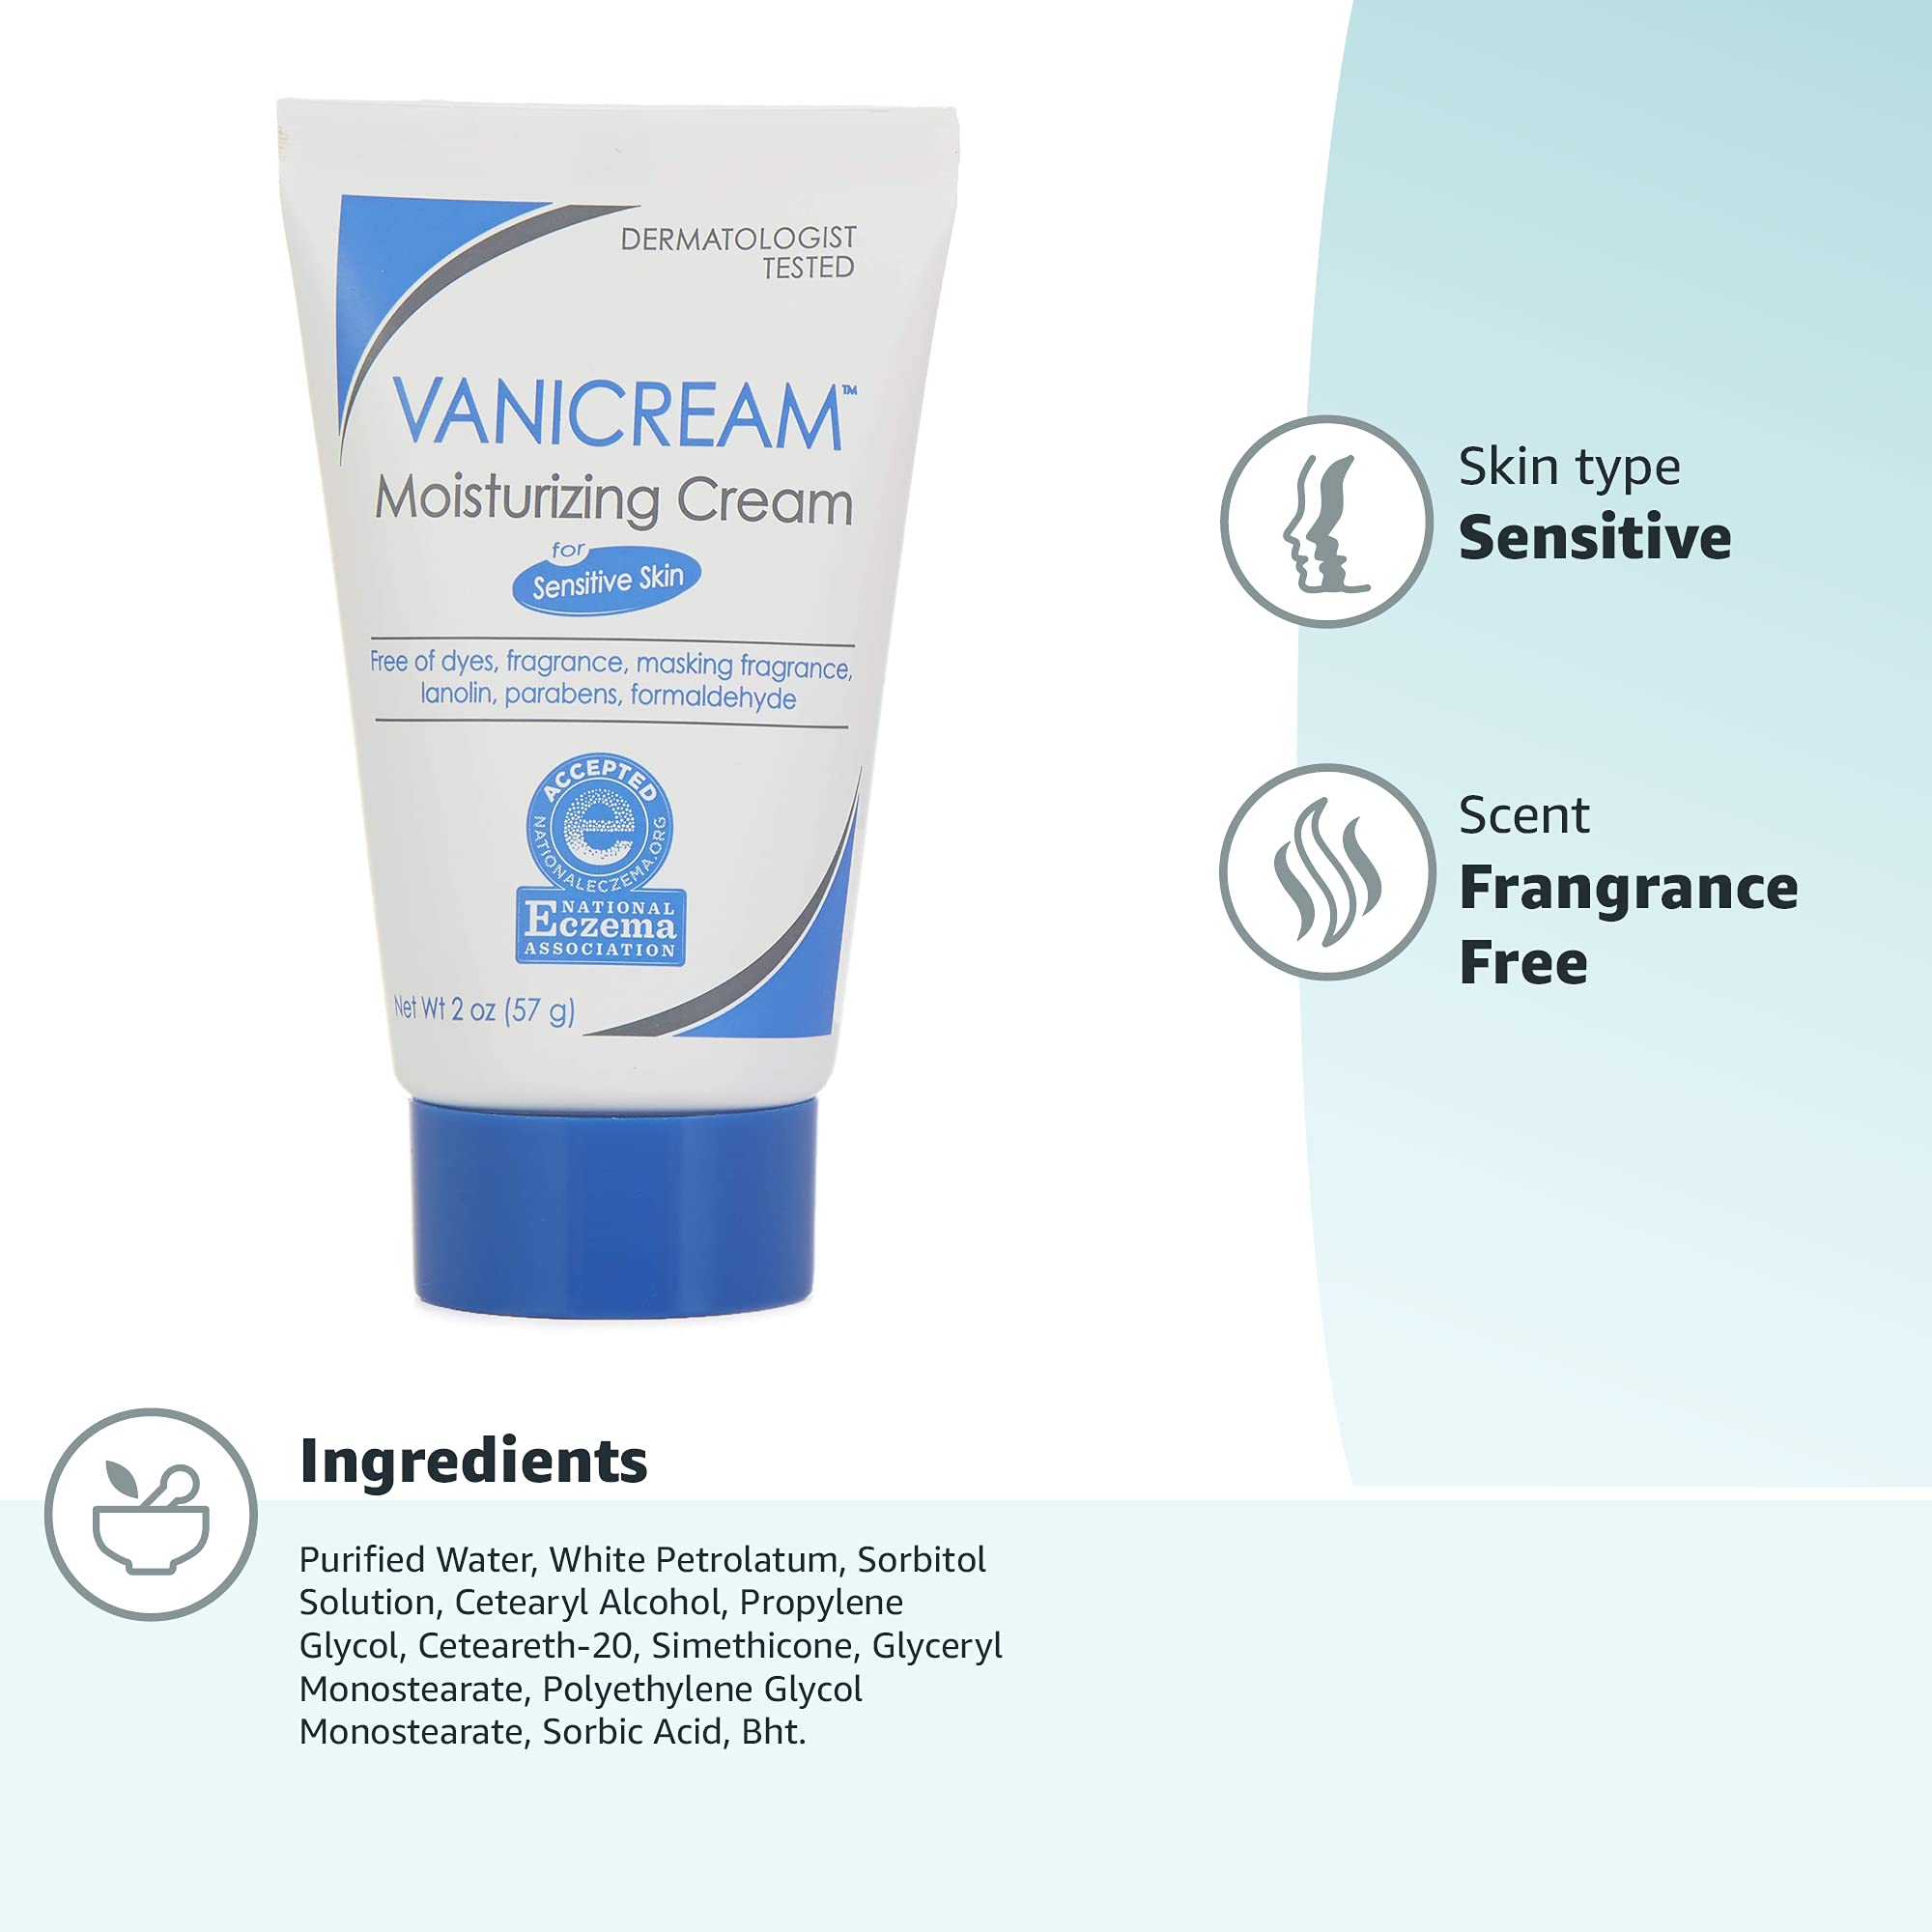 Vanicream Moisturizing Skin Cream Tube for Sensitive Skin, Soothes Red, Irritated, Cracked or Itchy Skin, Dye, Fragrance, Preservative Free, Dermatologist Tested, 2 Ounce (Pack of 1)